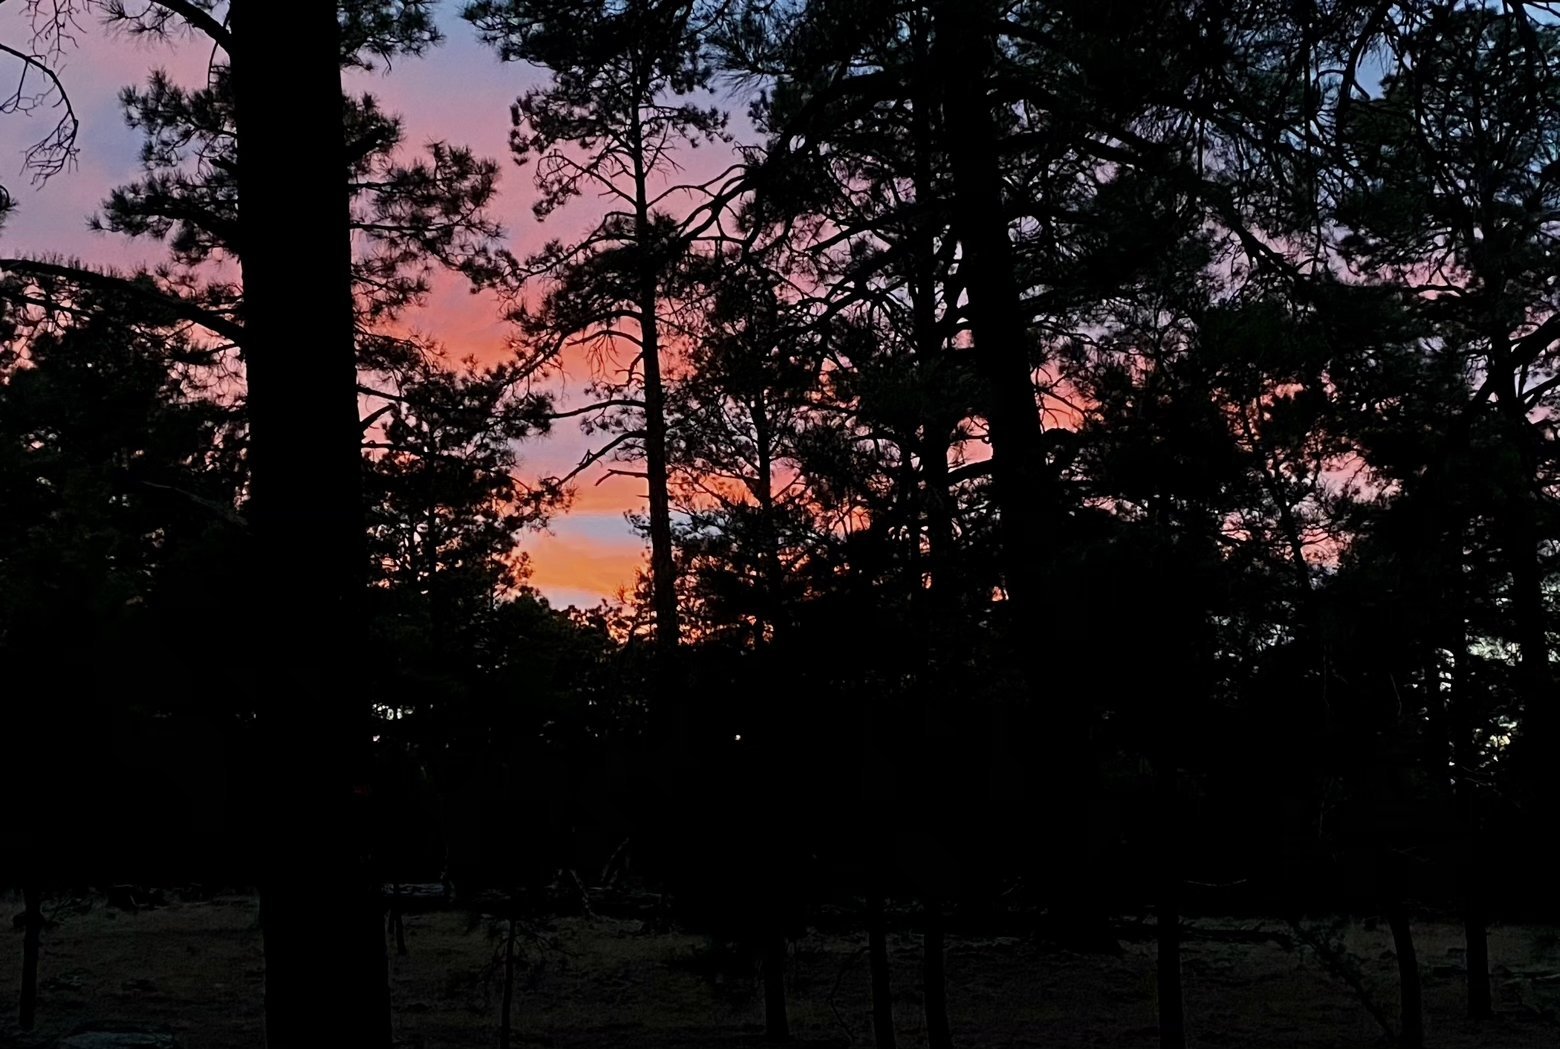 Bright colors of sunset through the pines